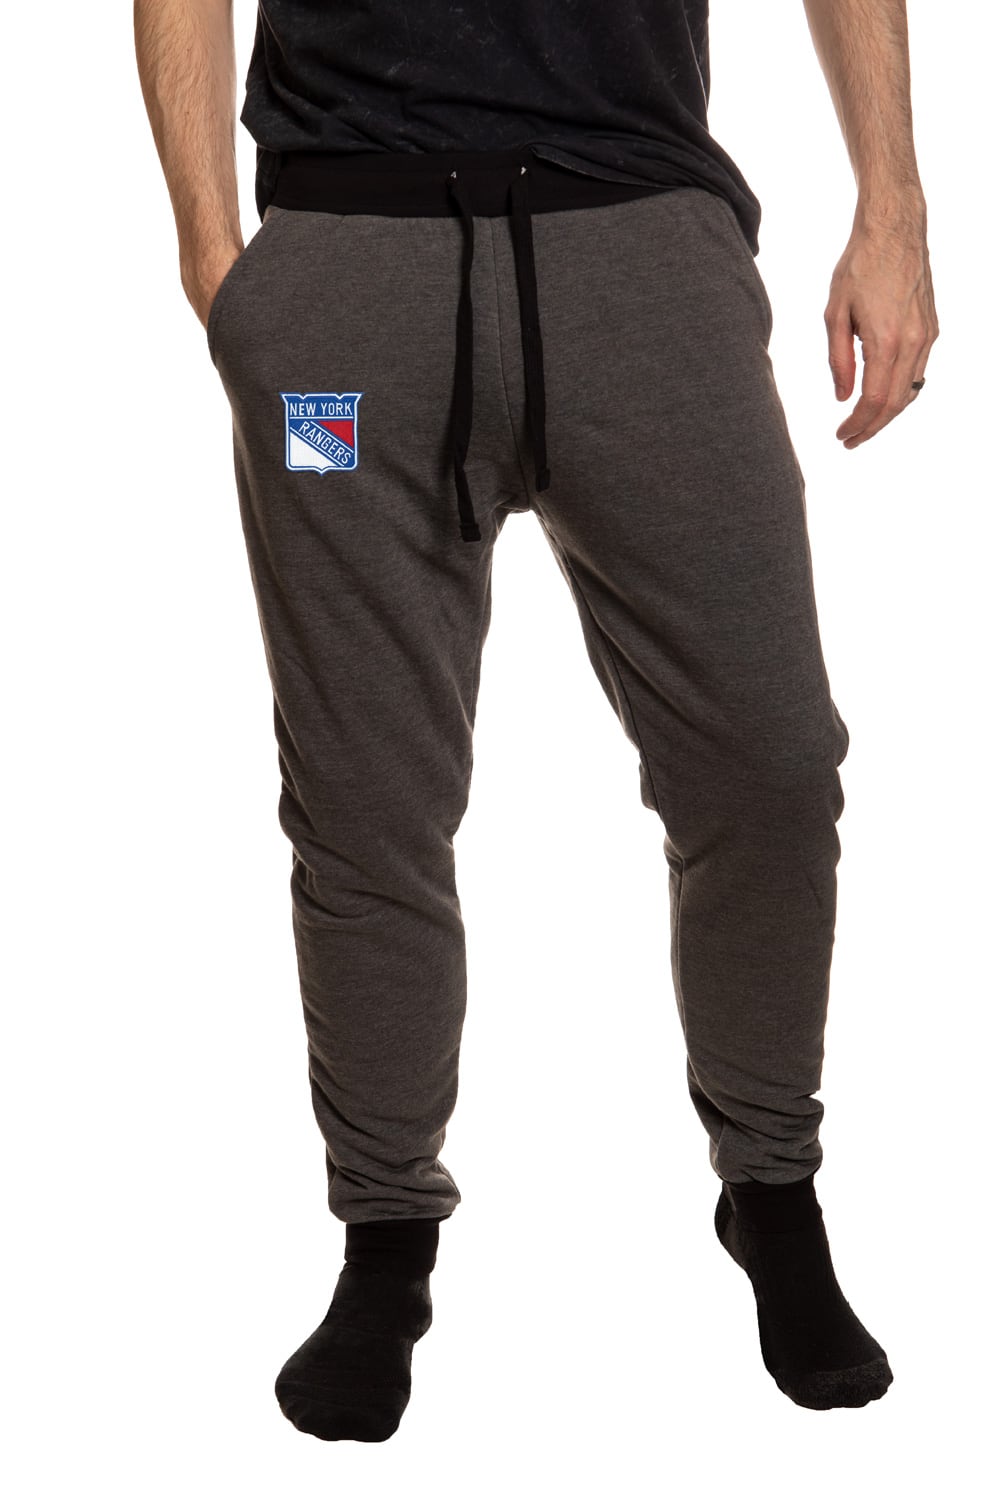 New York Rangers Sherpa Lined Sweatpants with Pockets